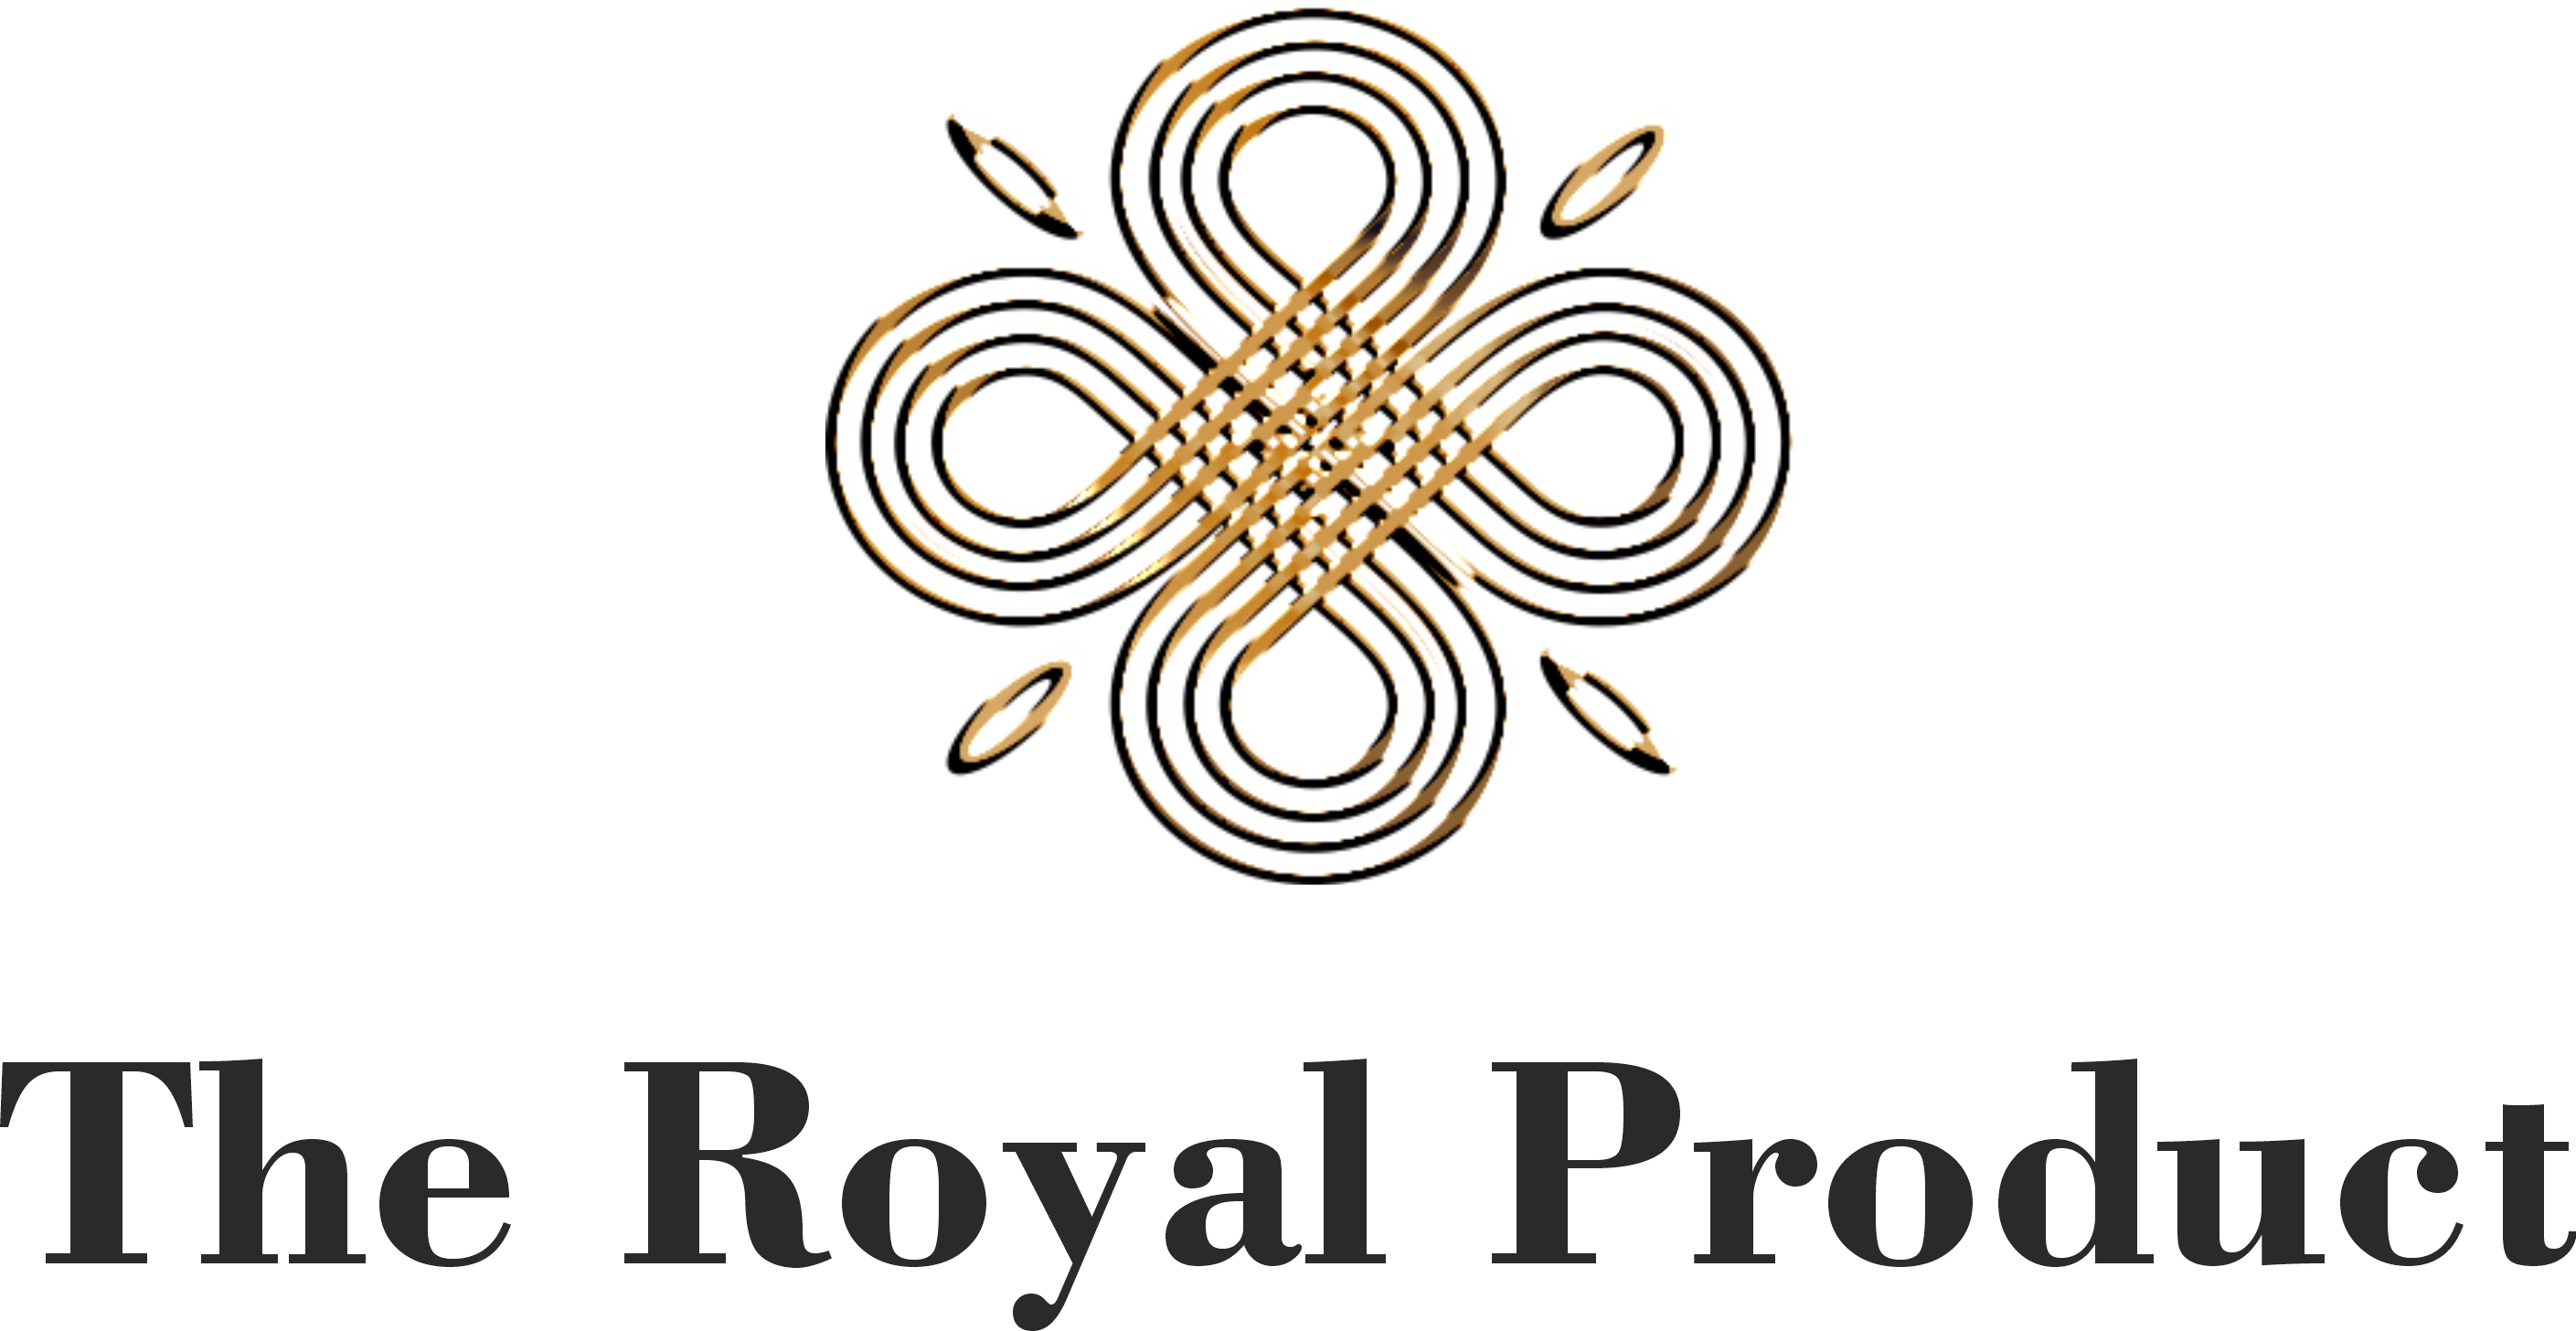 The Royal Product